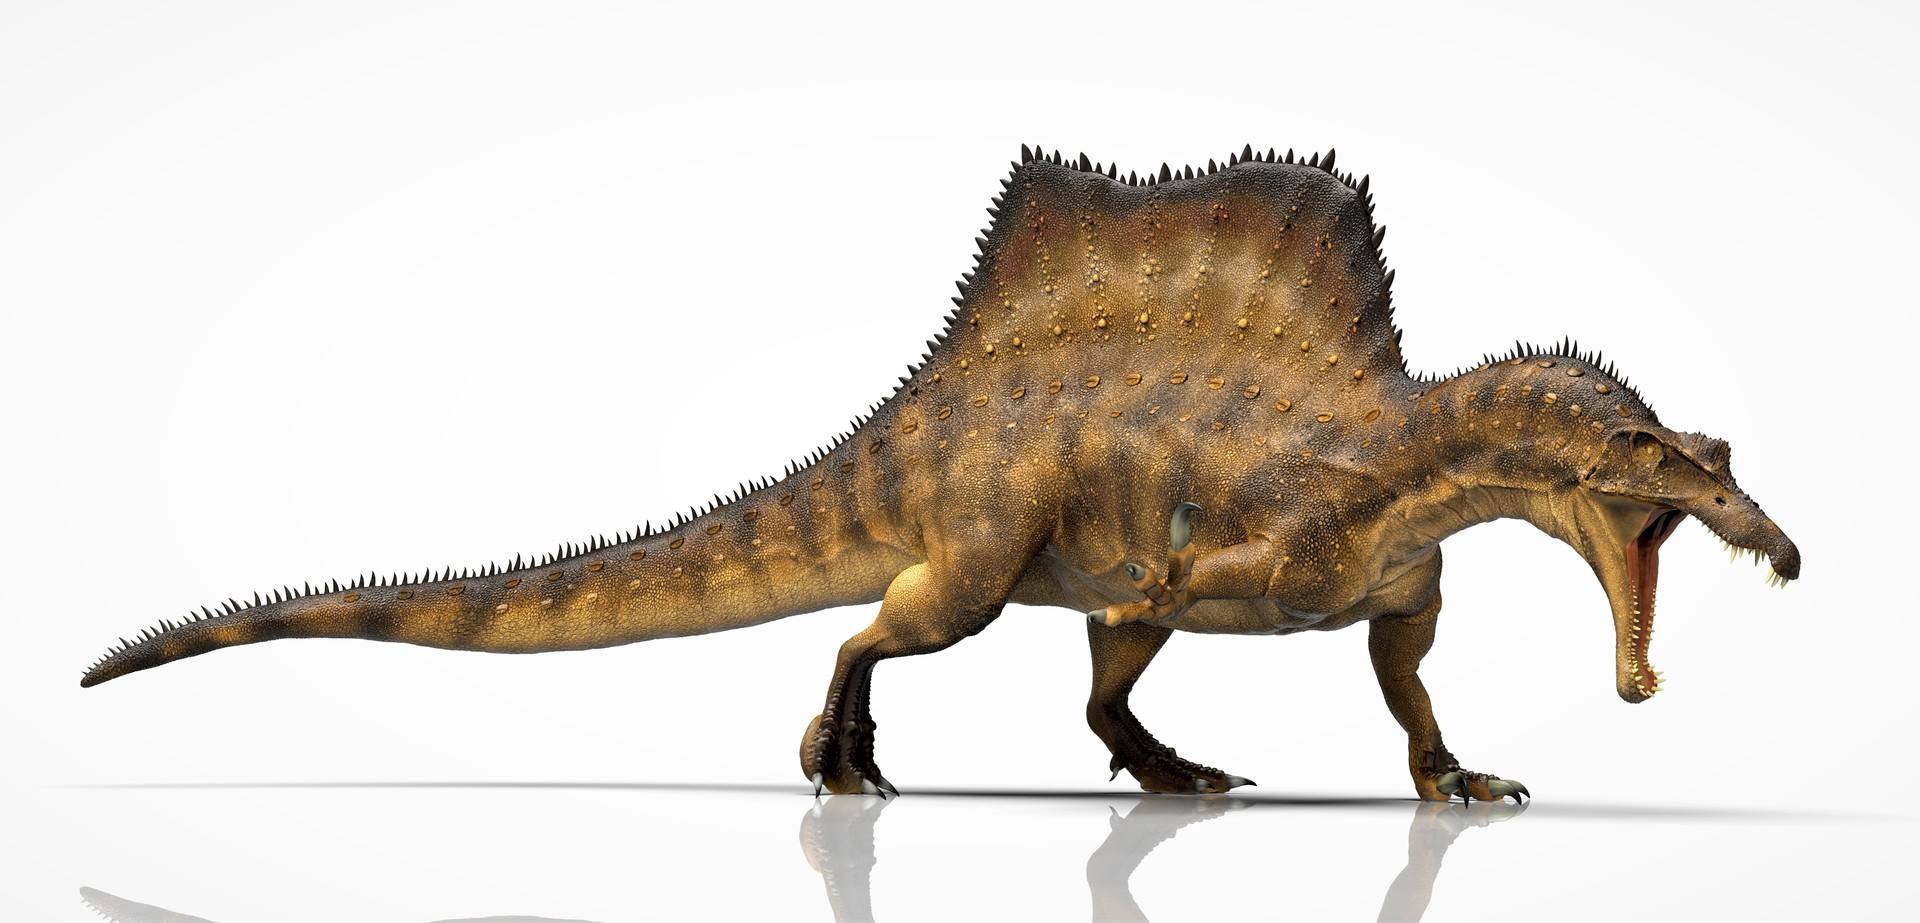 Spinosaurus on all fours. When vs Carcharodontosaurus it may have used its claws to fight.